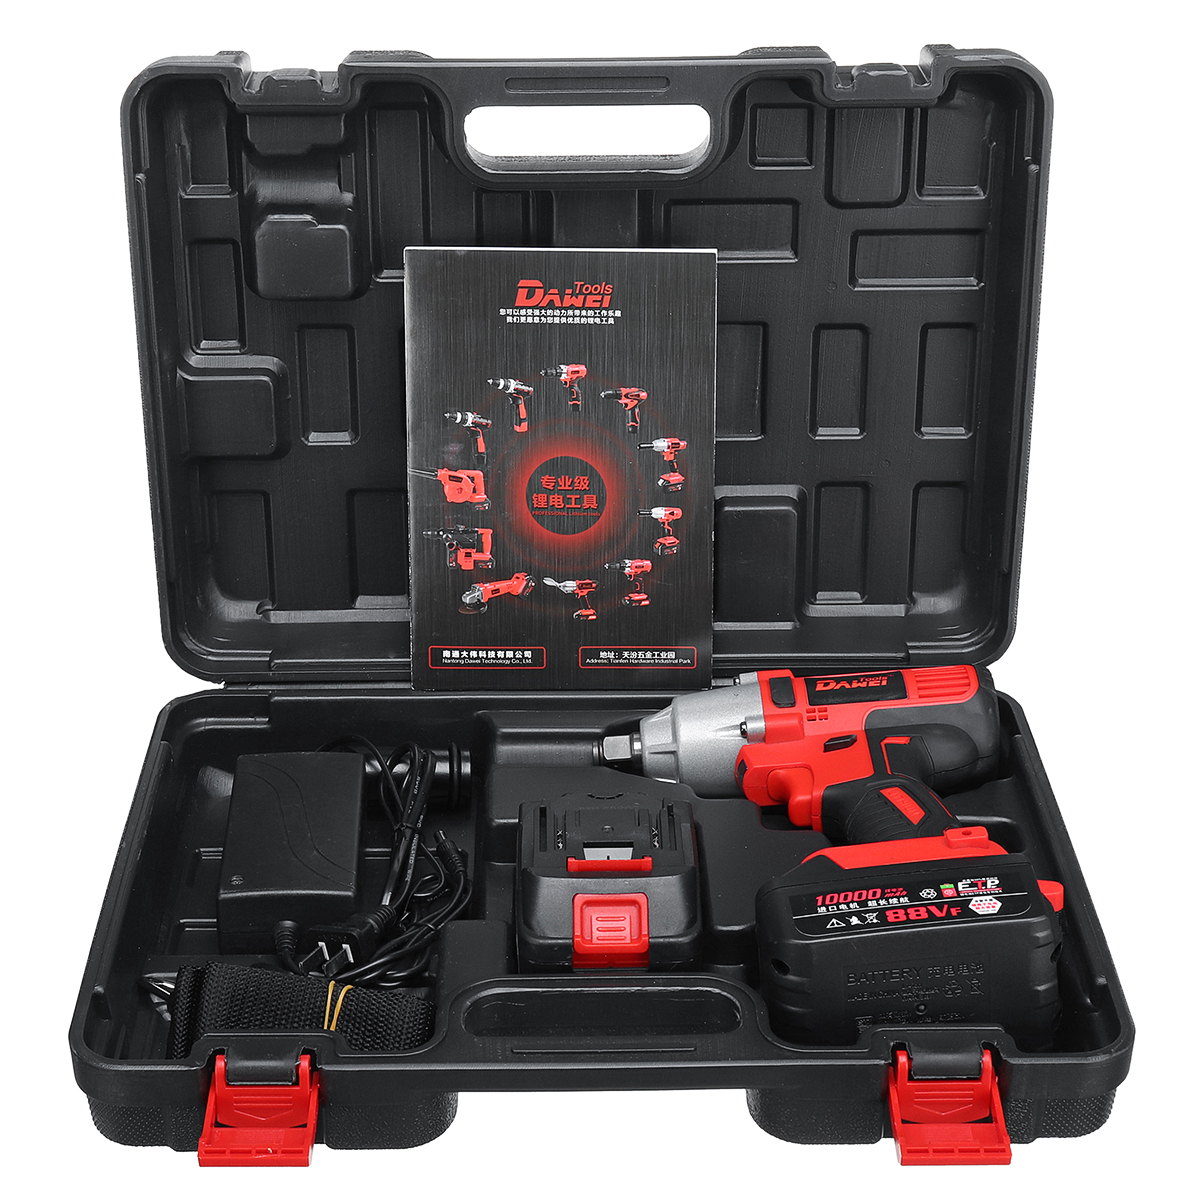 21V-Li-ion-Electric-Impact-Wrench-Cordless-High-Torque-Power-Wrench-with-2-Battery-1283395-3